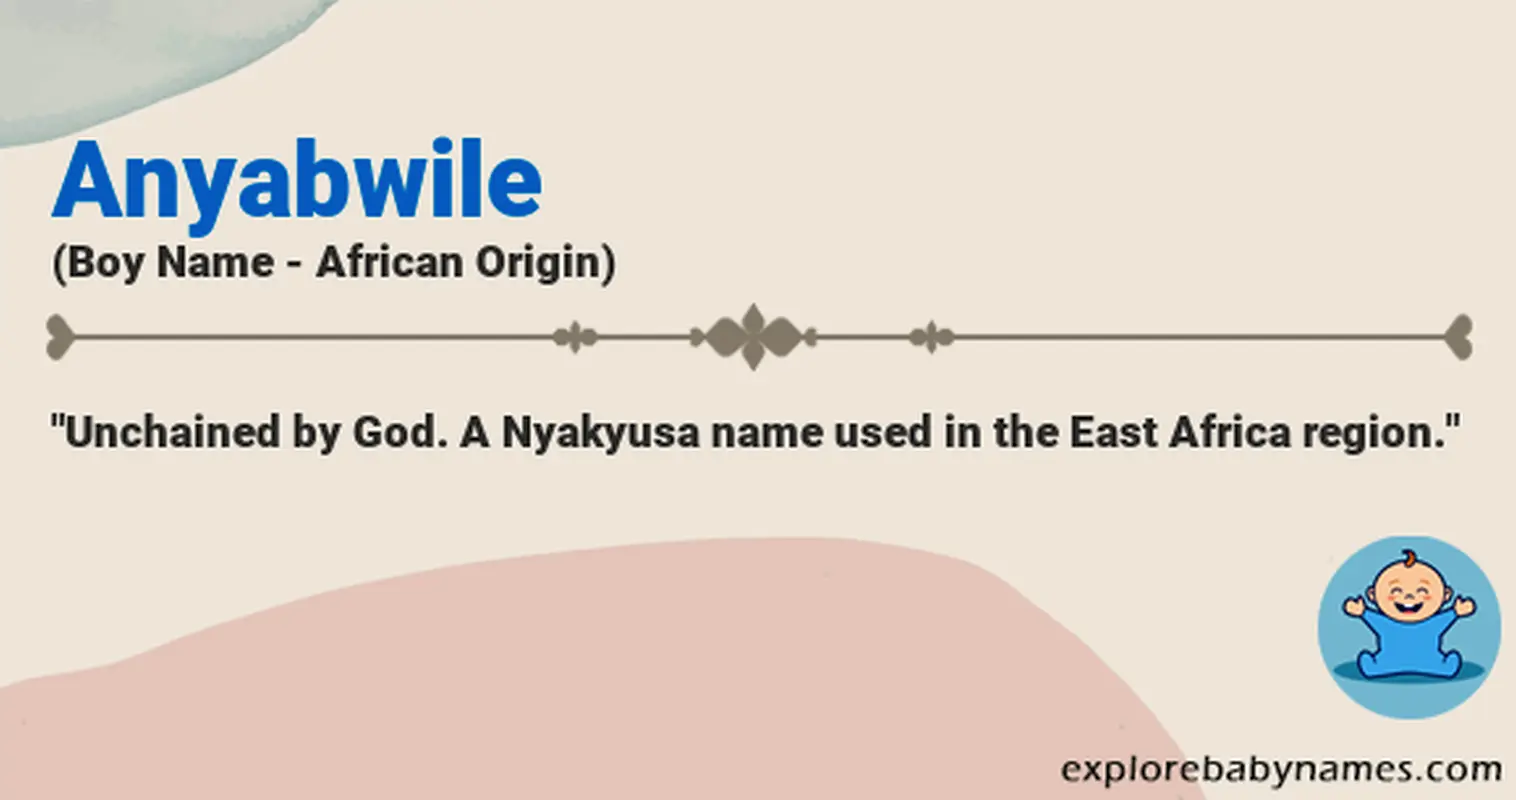 Meaning of Anyabwile